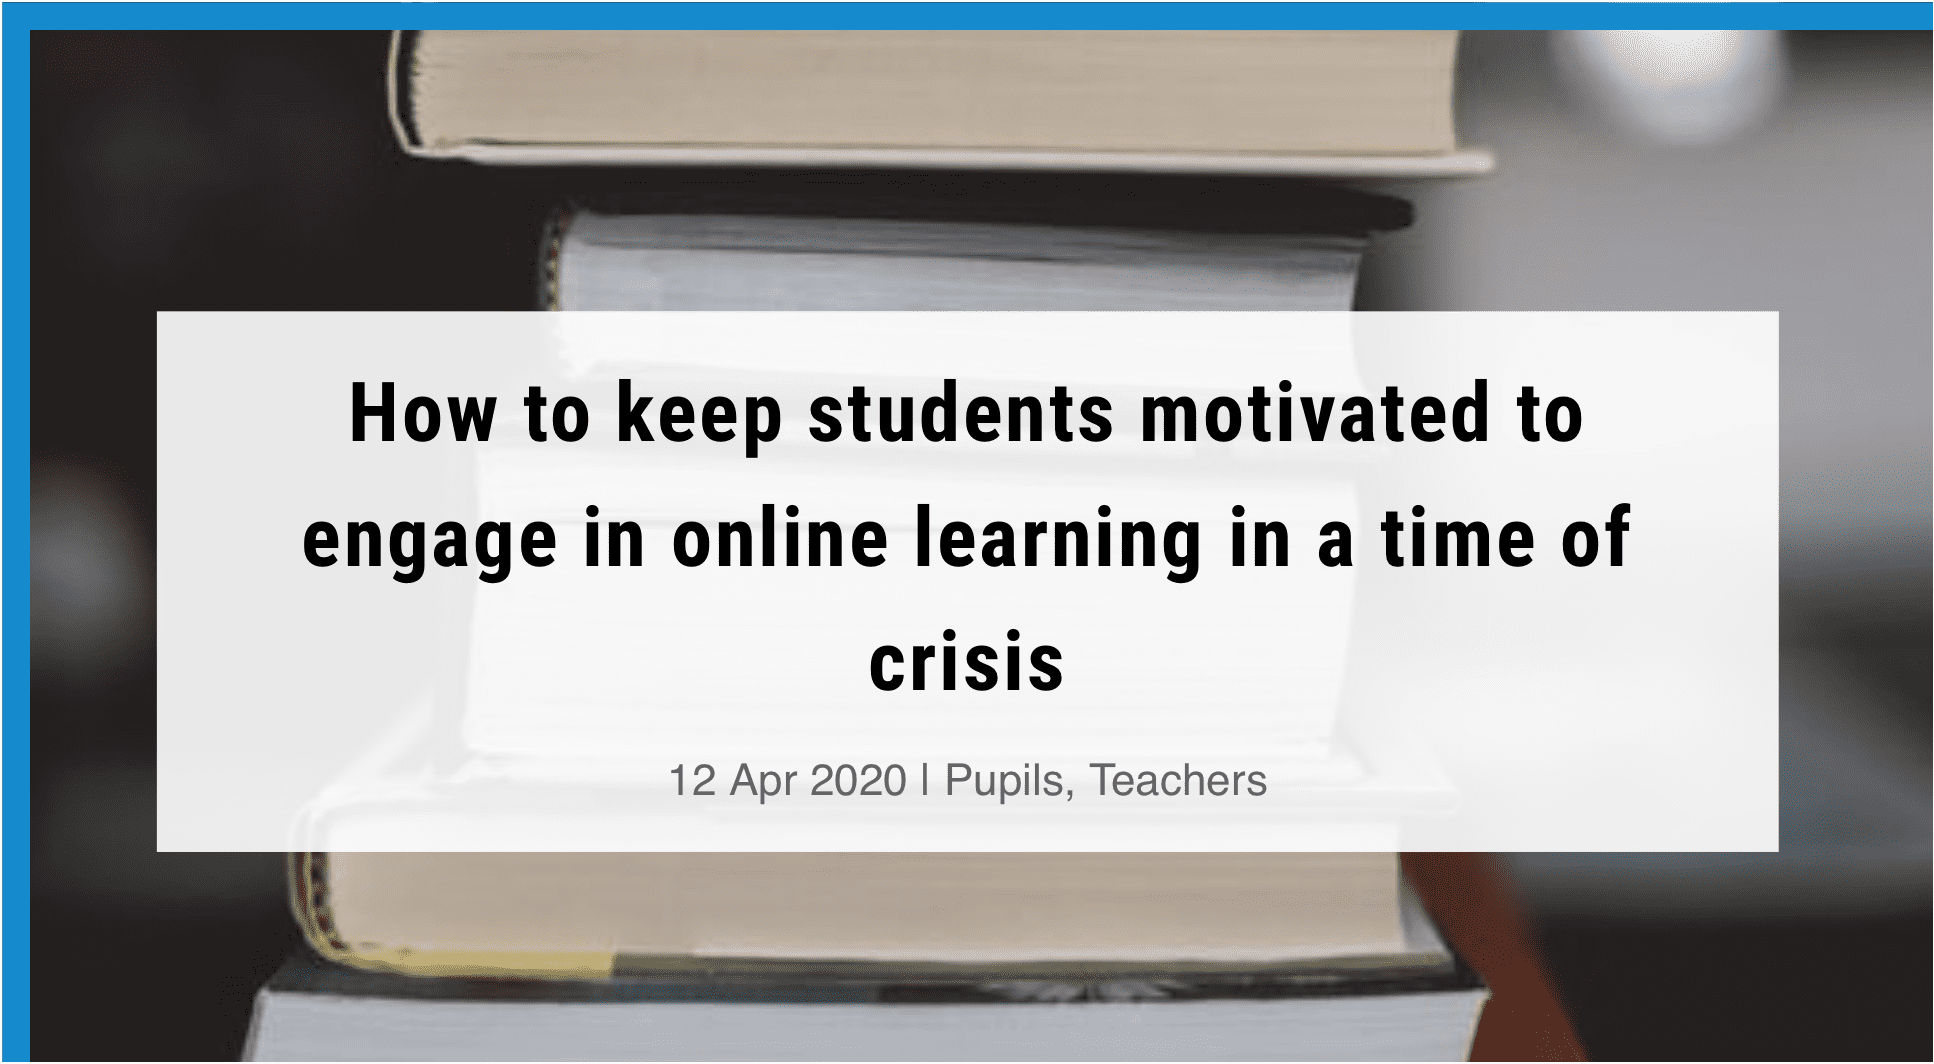 How can you motivate students to learn online in times of crisis